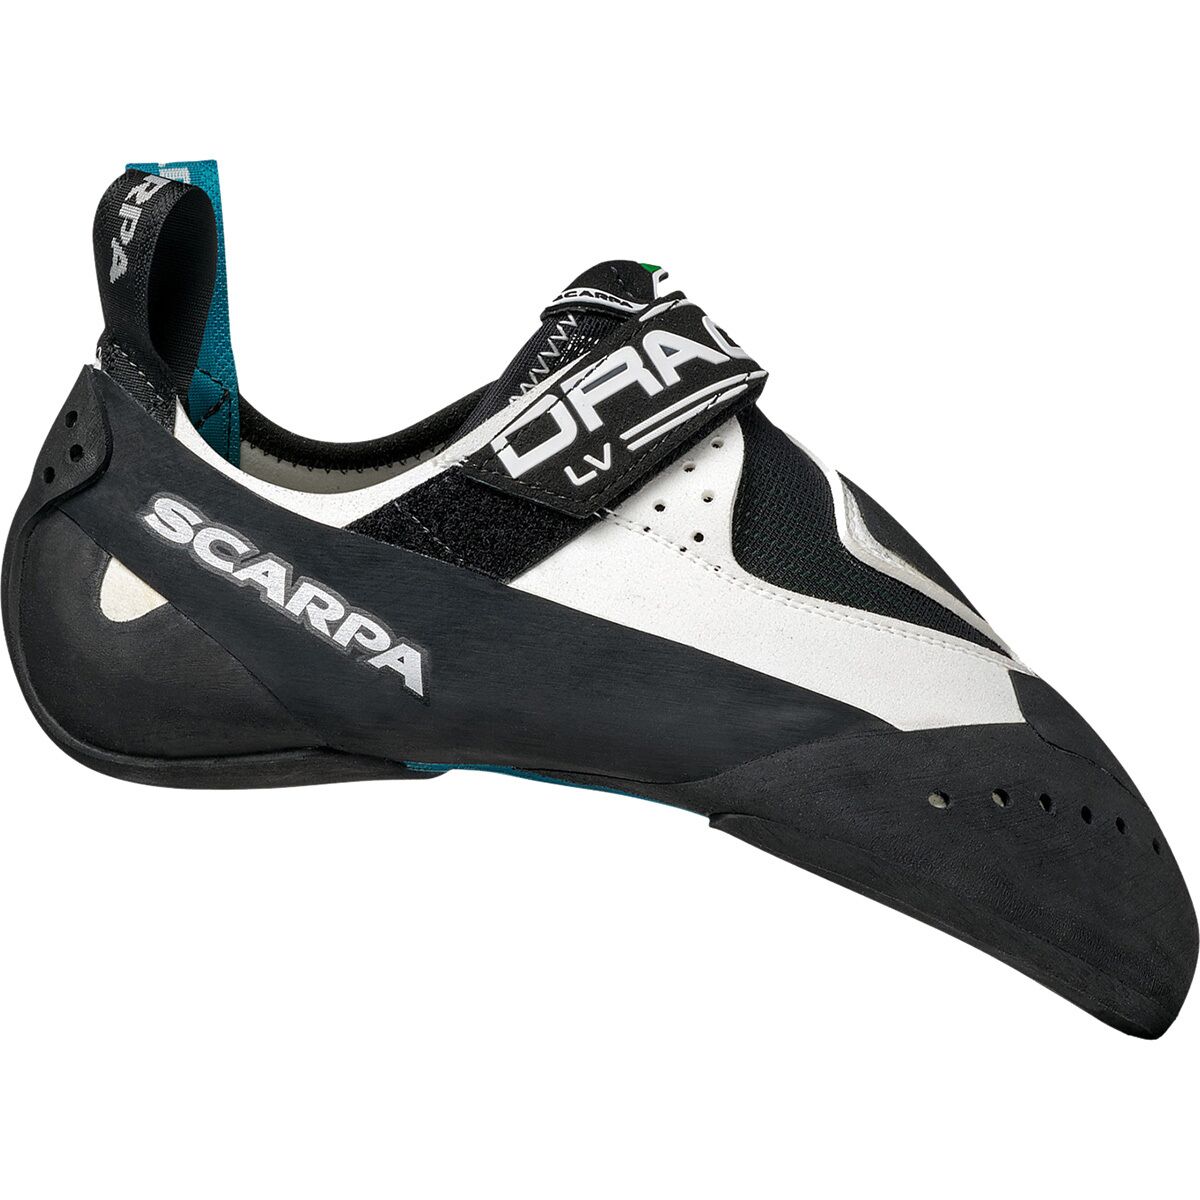 Buy Scarpa Drago LV from £124.06 (Today) – Best Black Friday Deals on